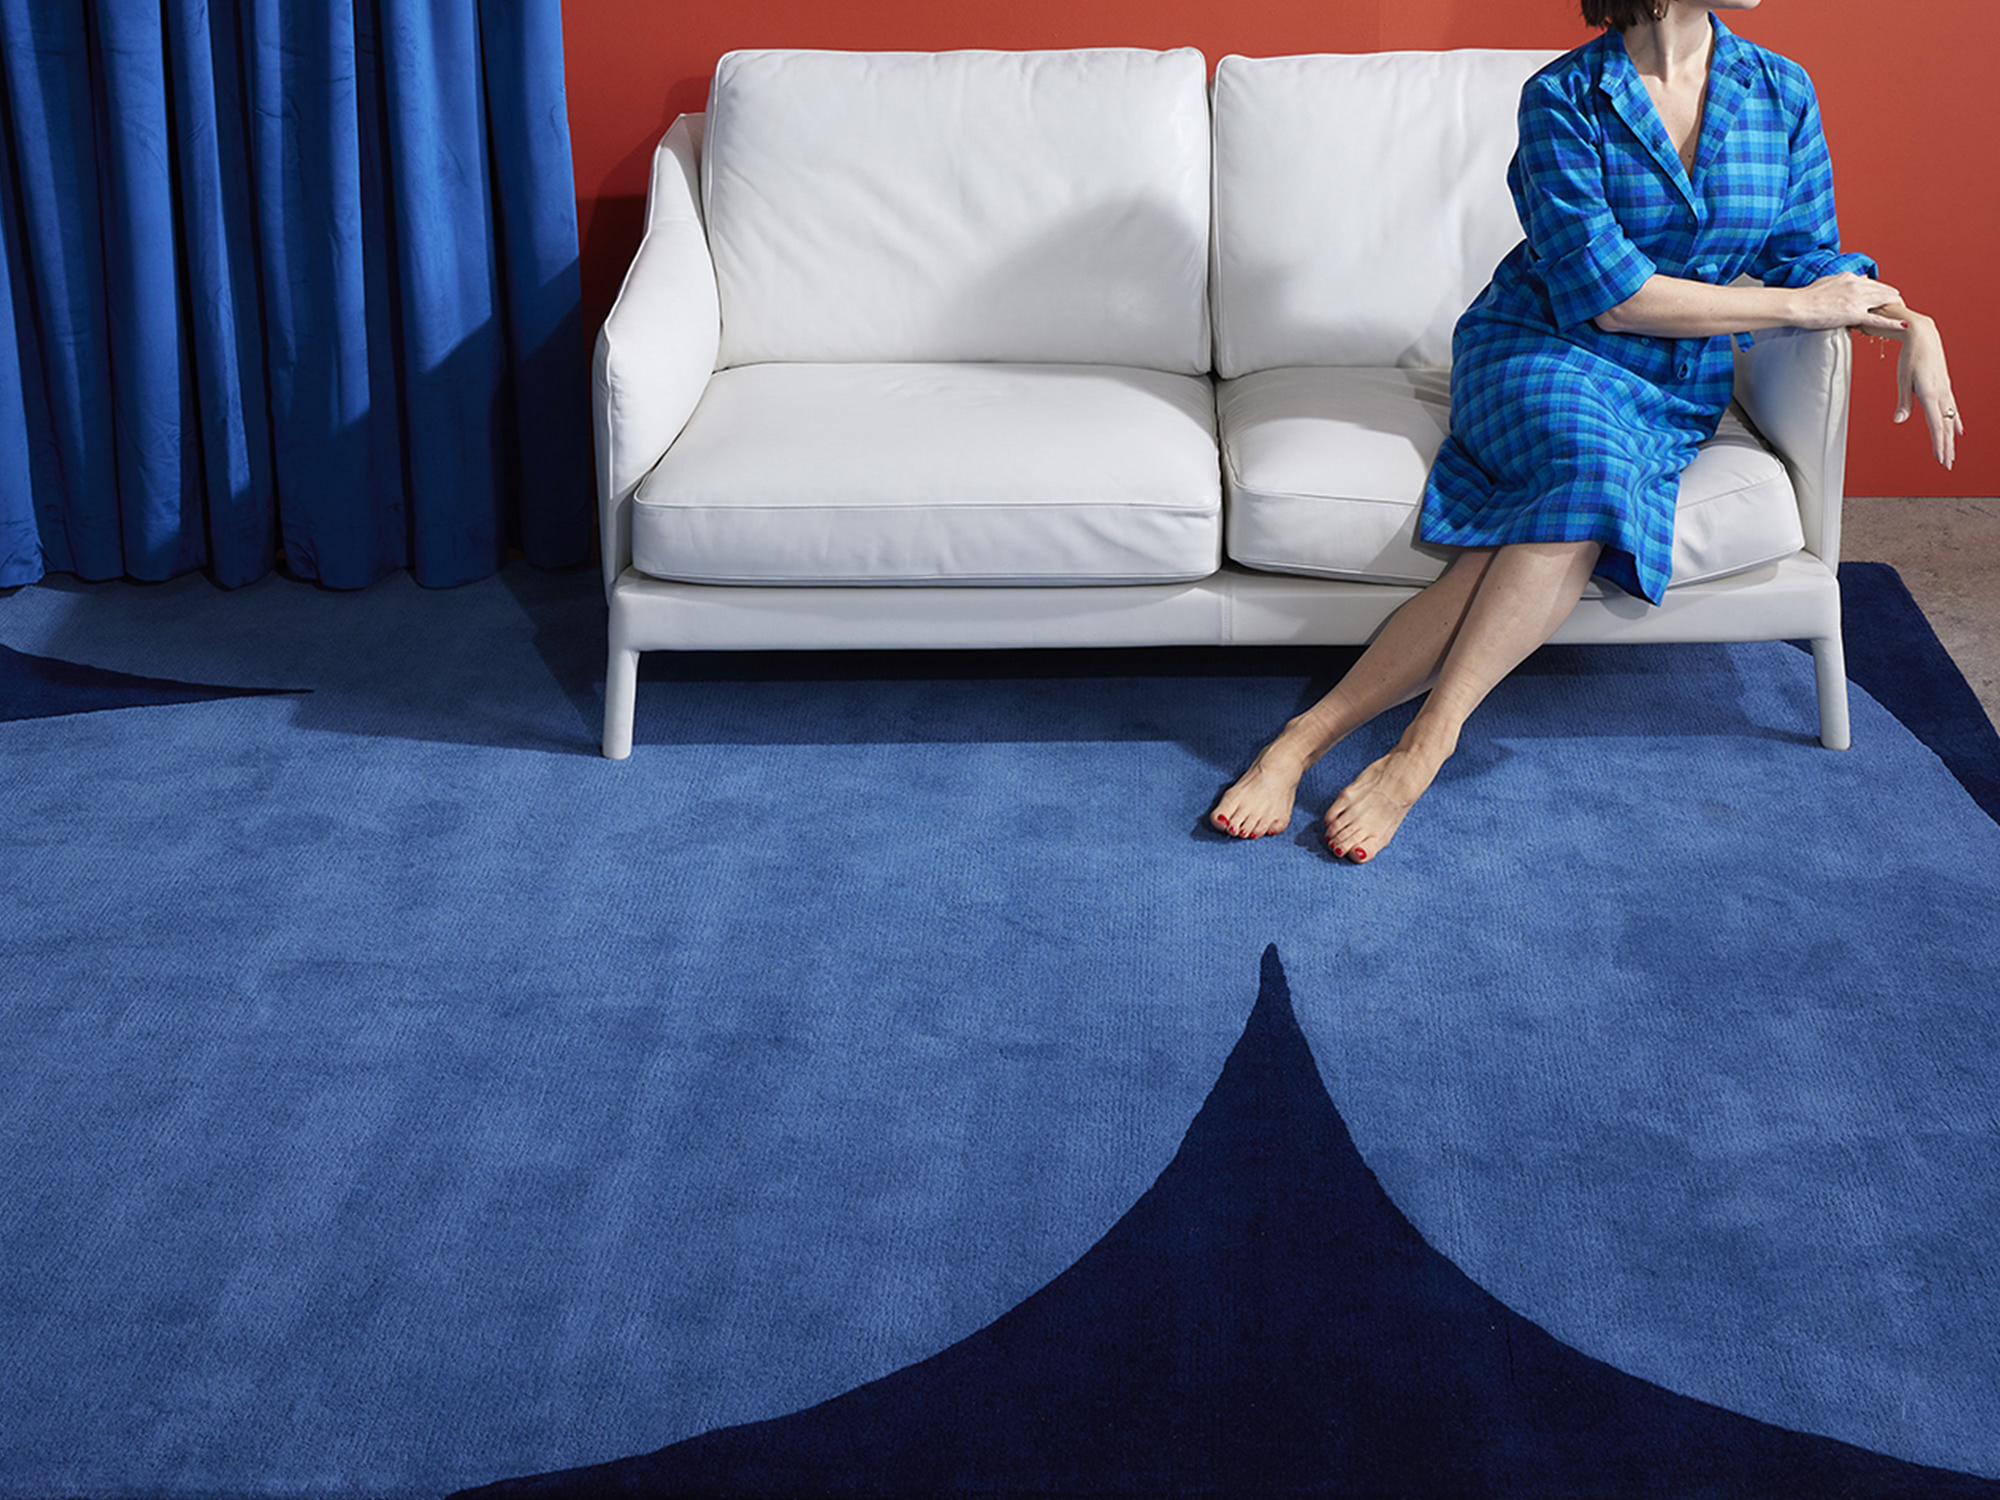 A woman in a blue dress sits casually on a white leather couch over a blue, modern area rug called Dove Twilight